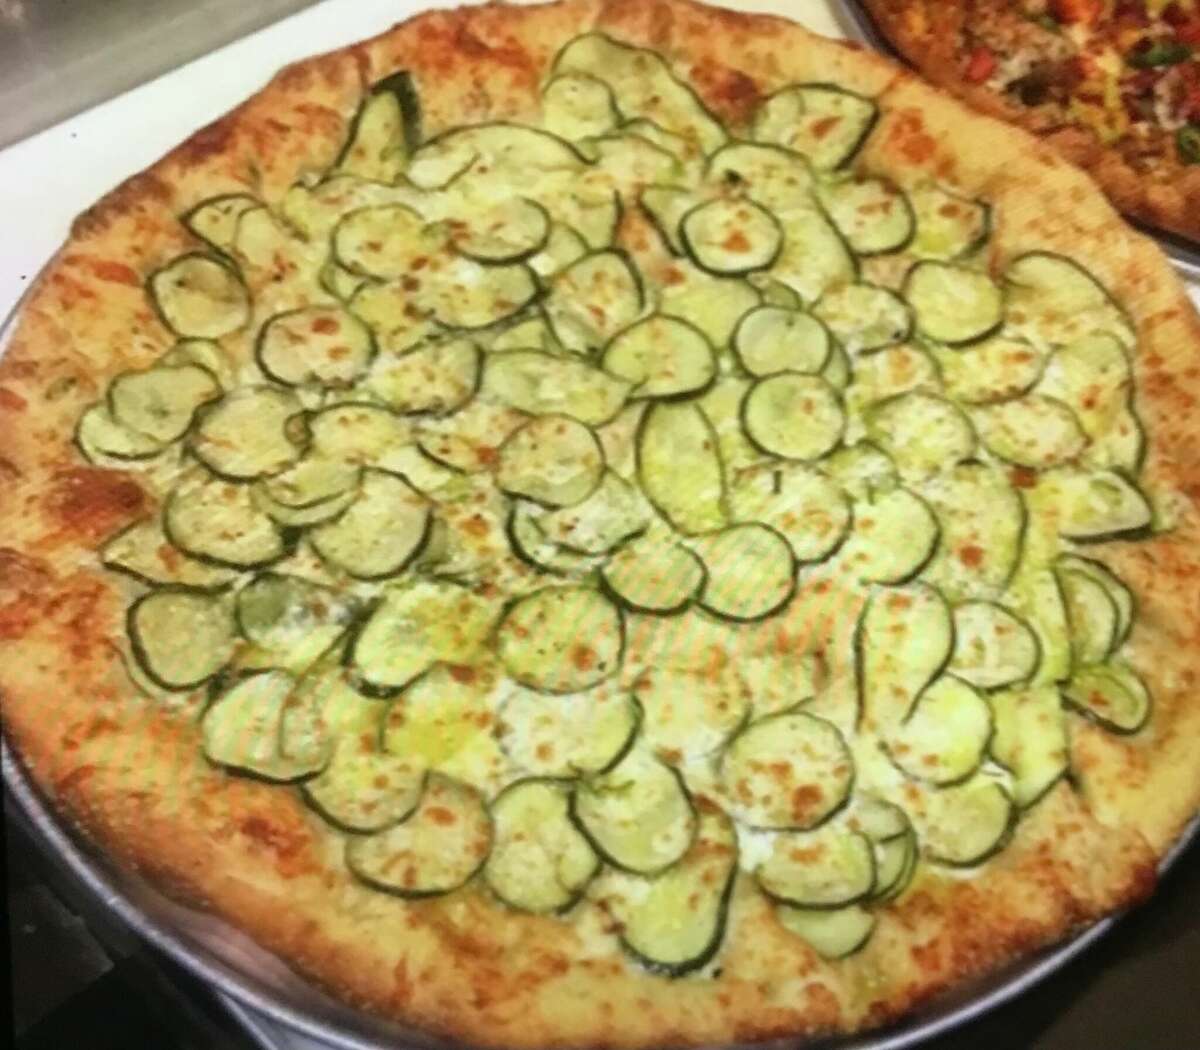 Swain's Concessions' pickle pizza at the Houston Rodeo.